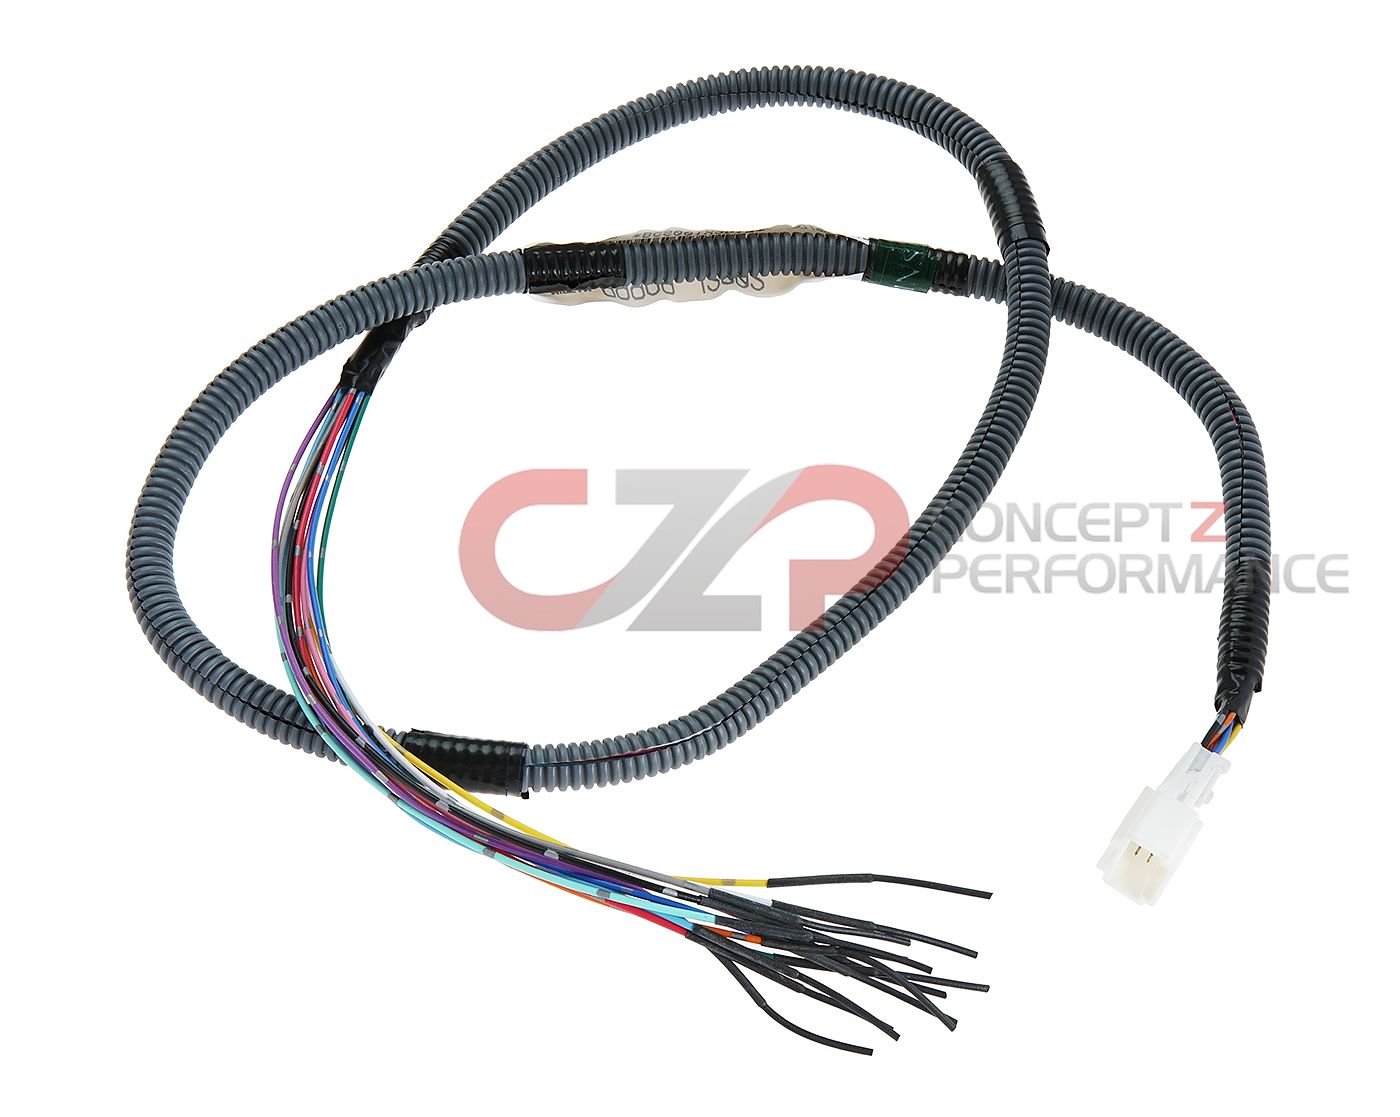 Infiniti OEM Accessory Service Connector Harness for Welcome Lighting Ground Illumination - Infiniti Q50 14-15 V37